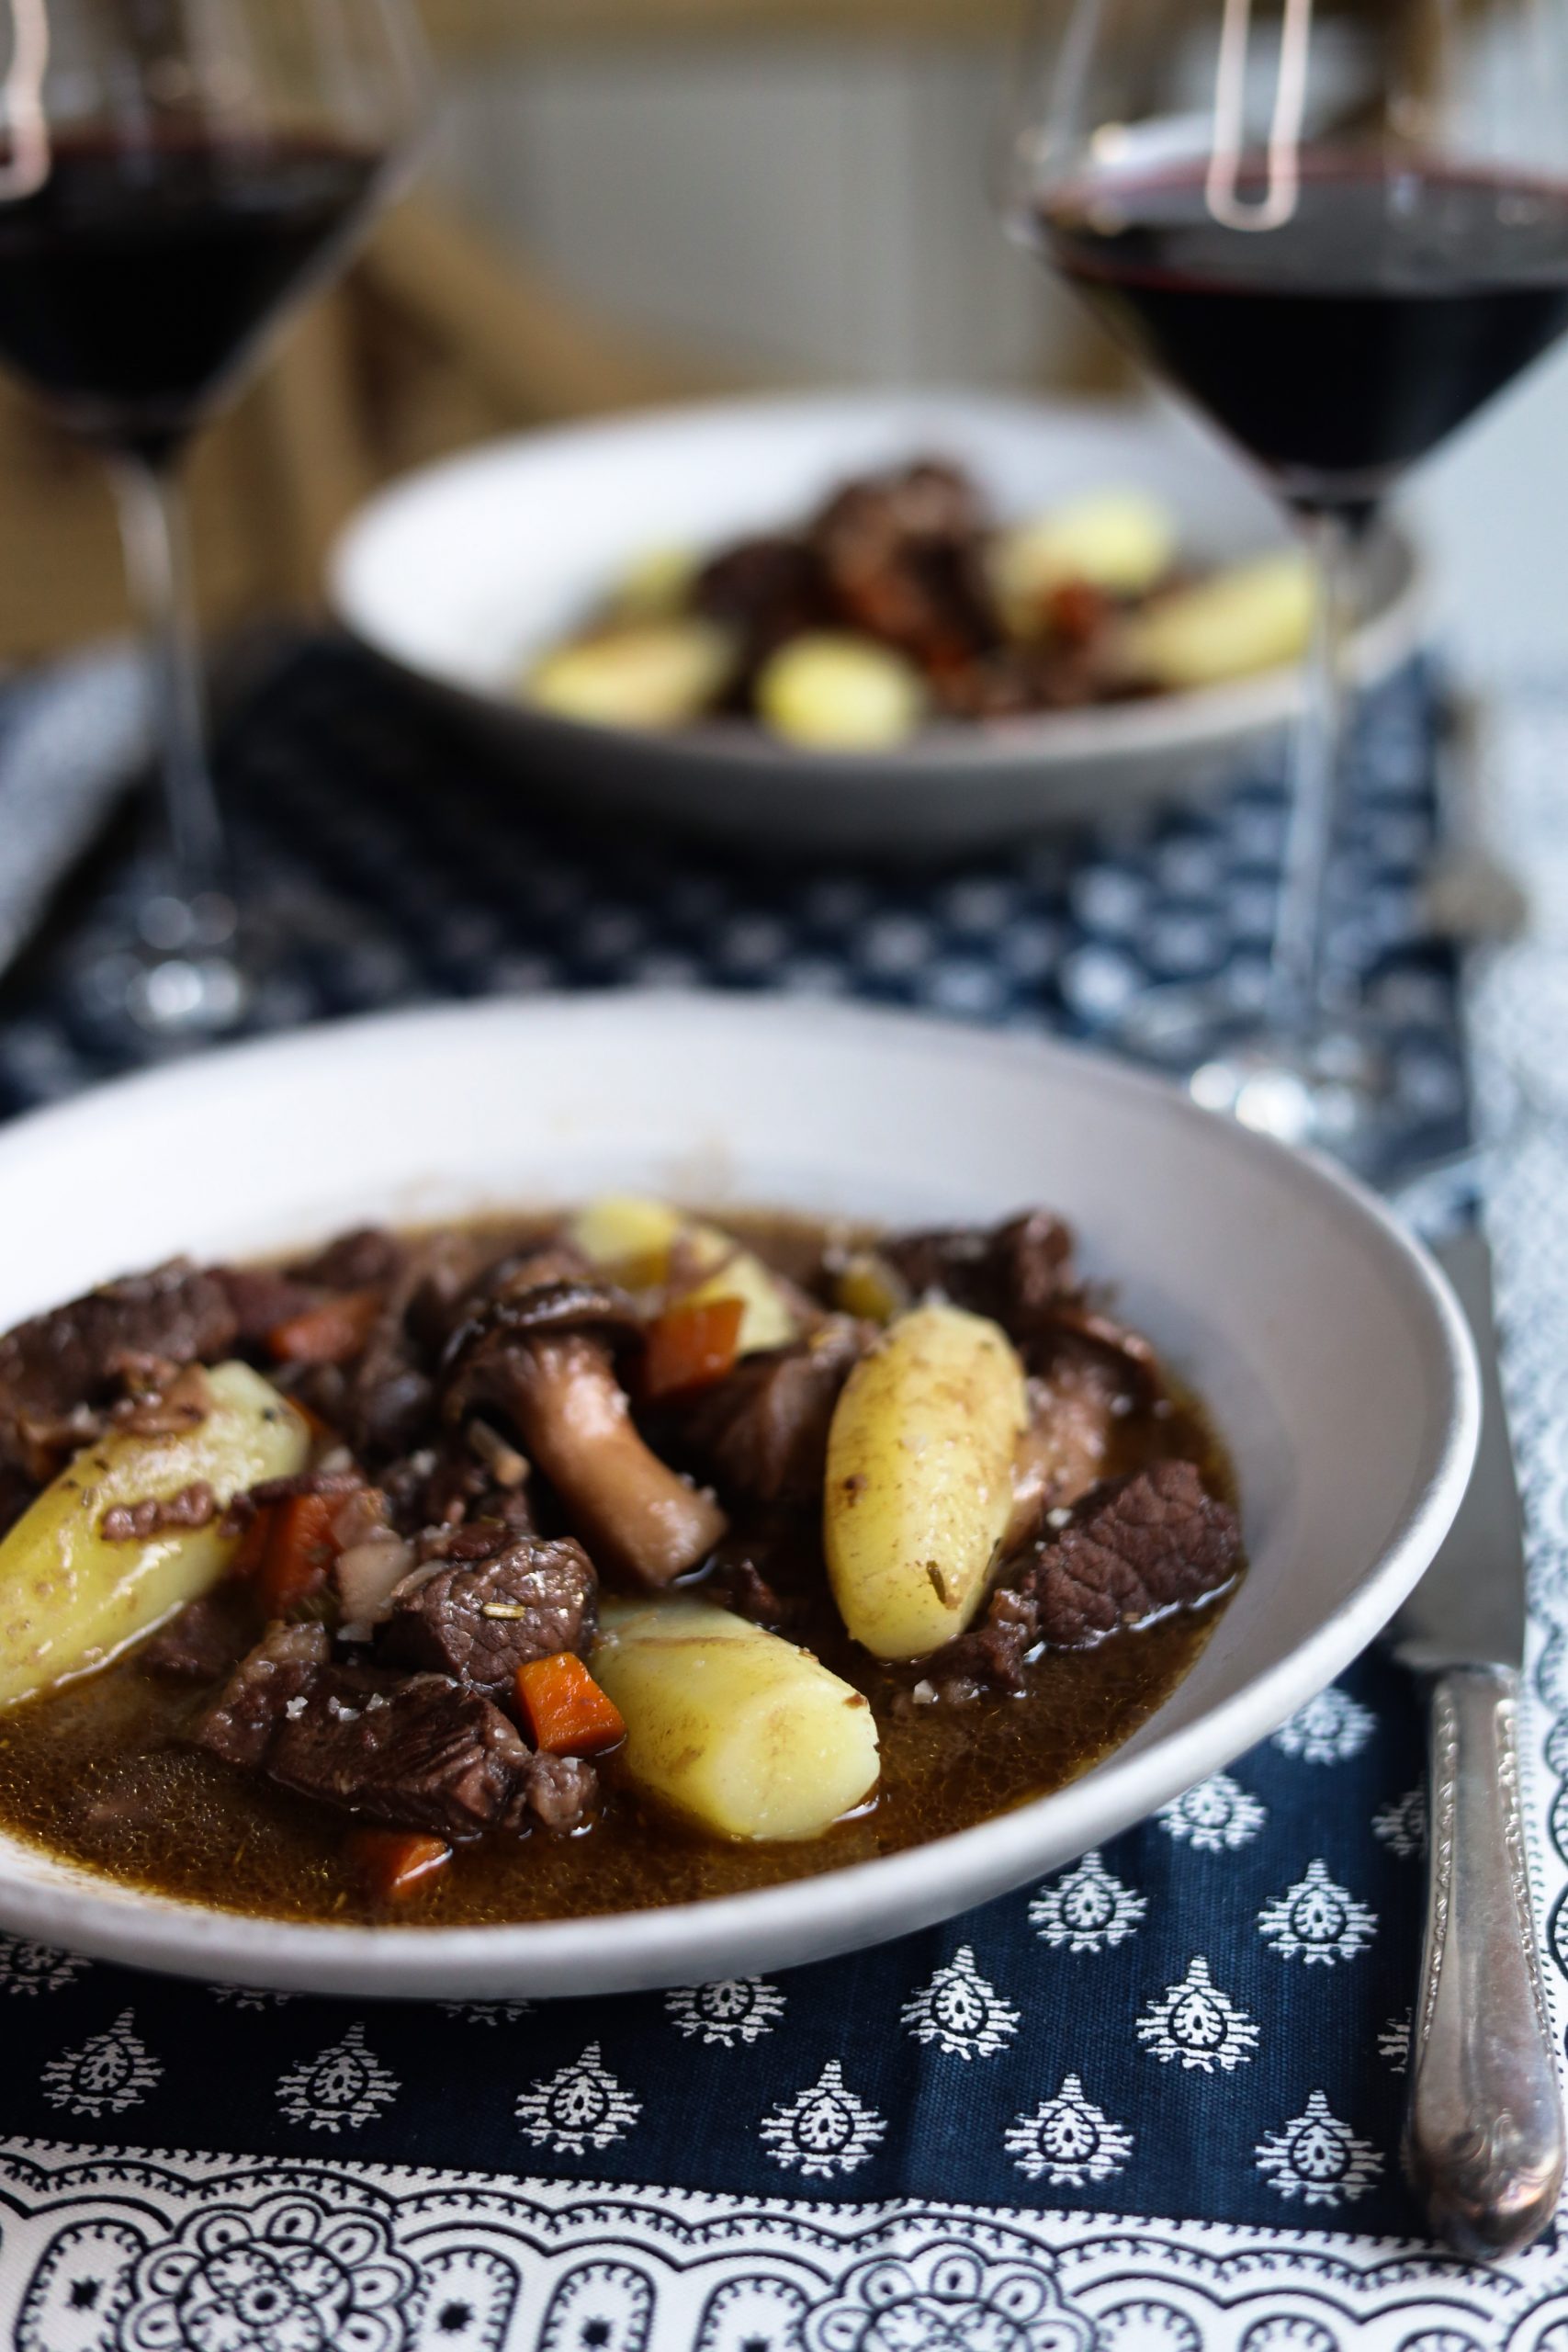 beef bourguignon in a plate with potatoes tournées